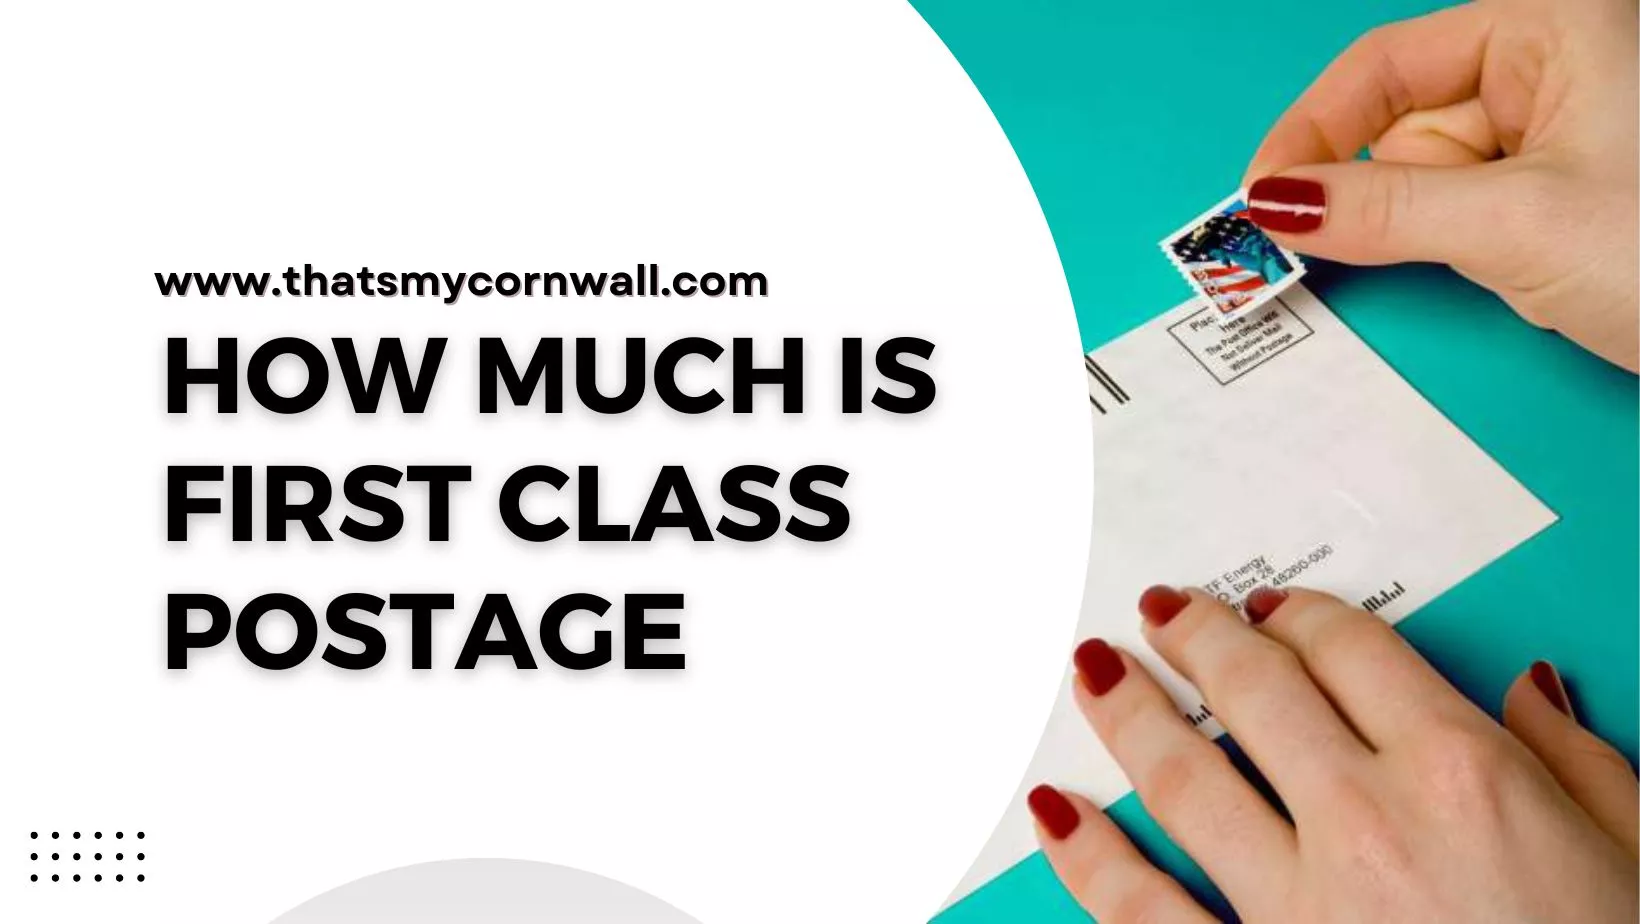 How Much is First Class Postage?